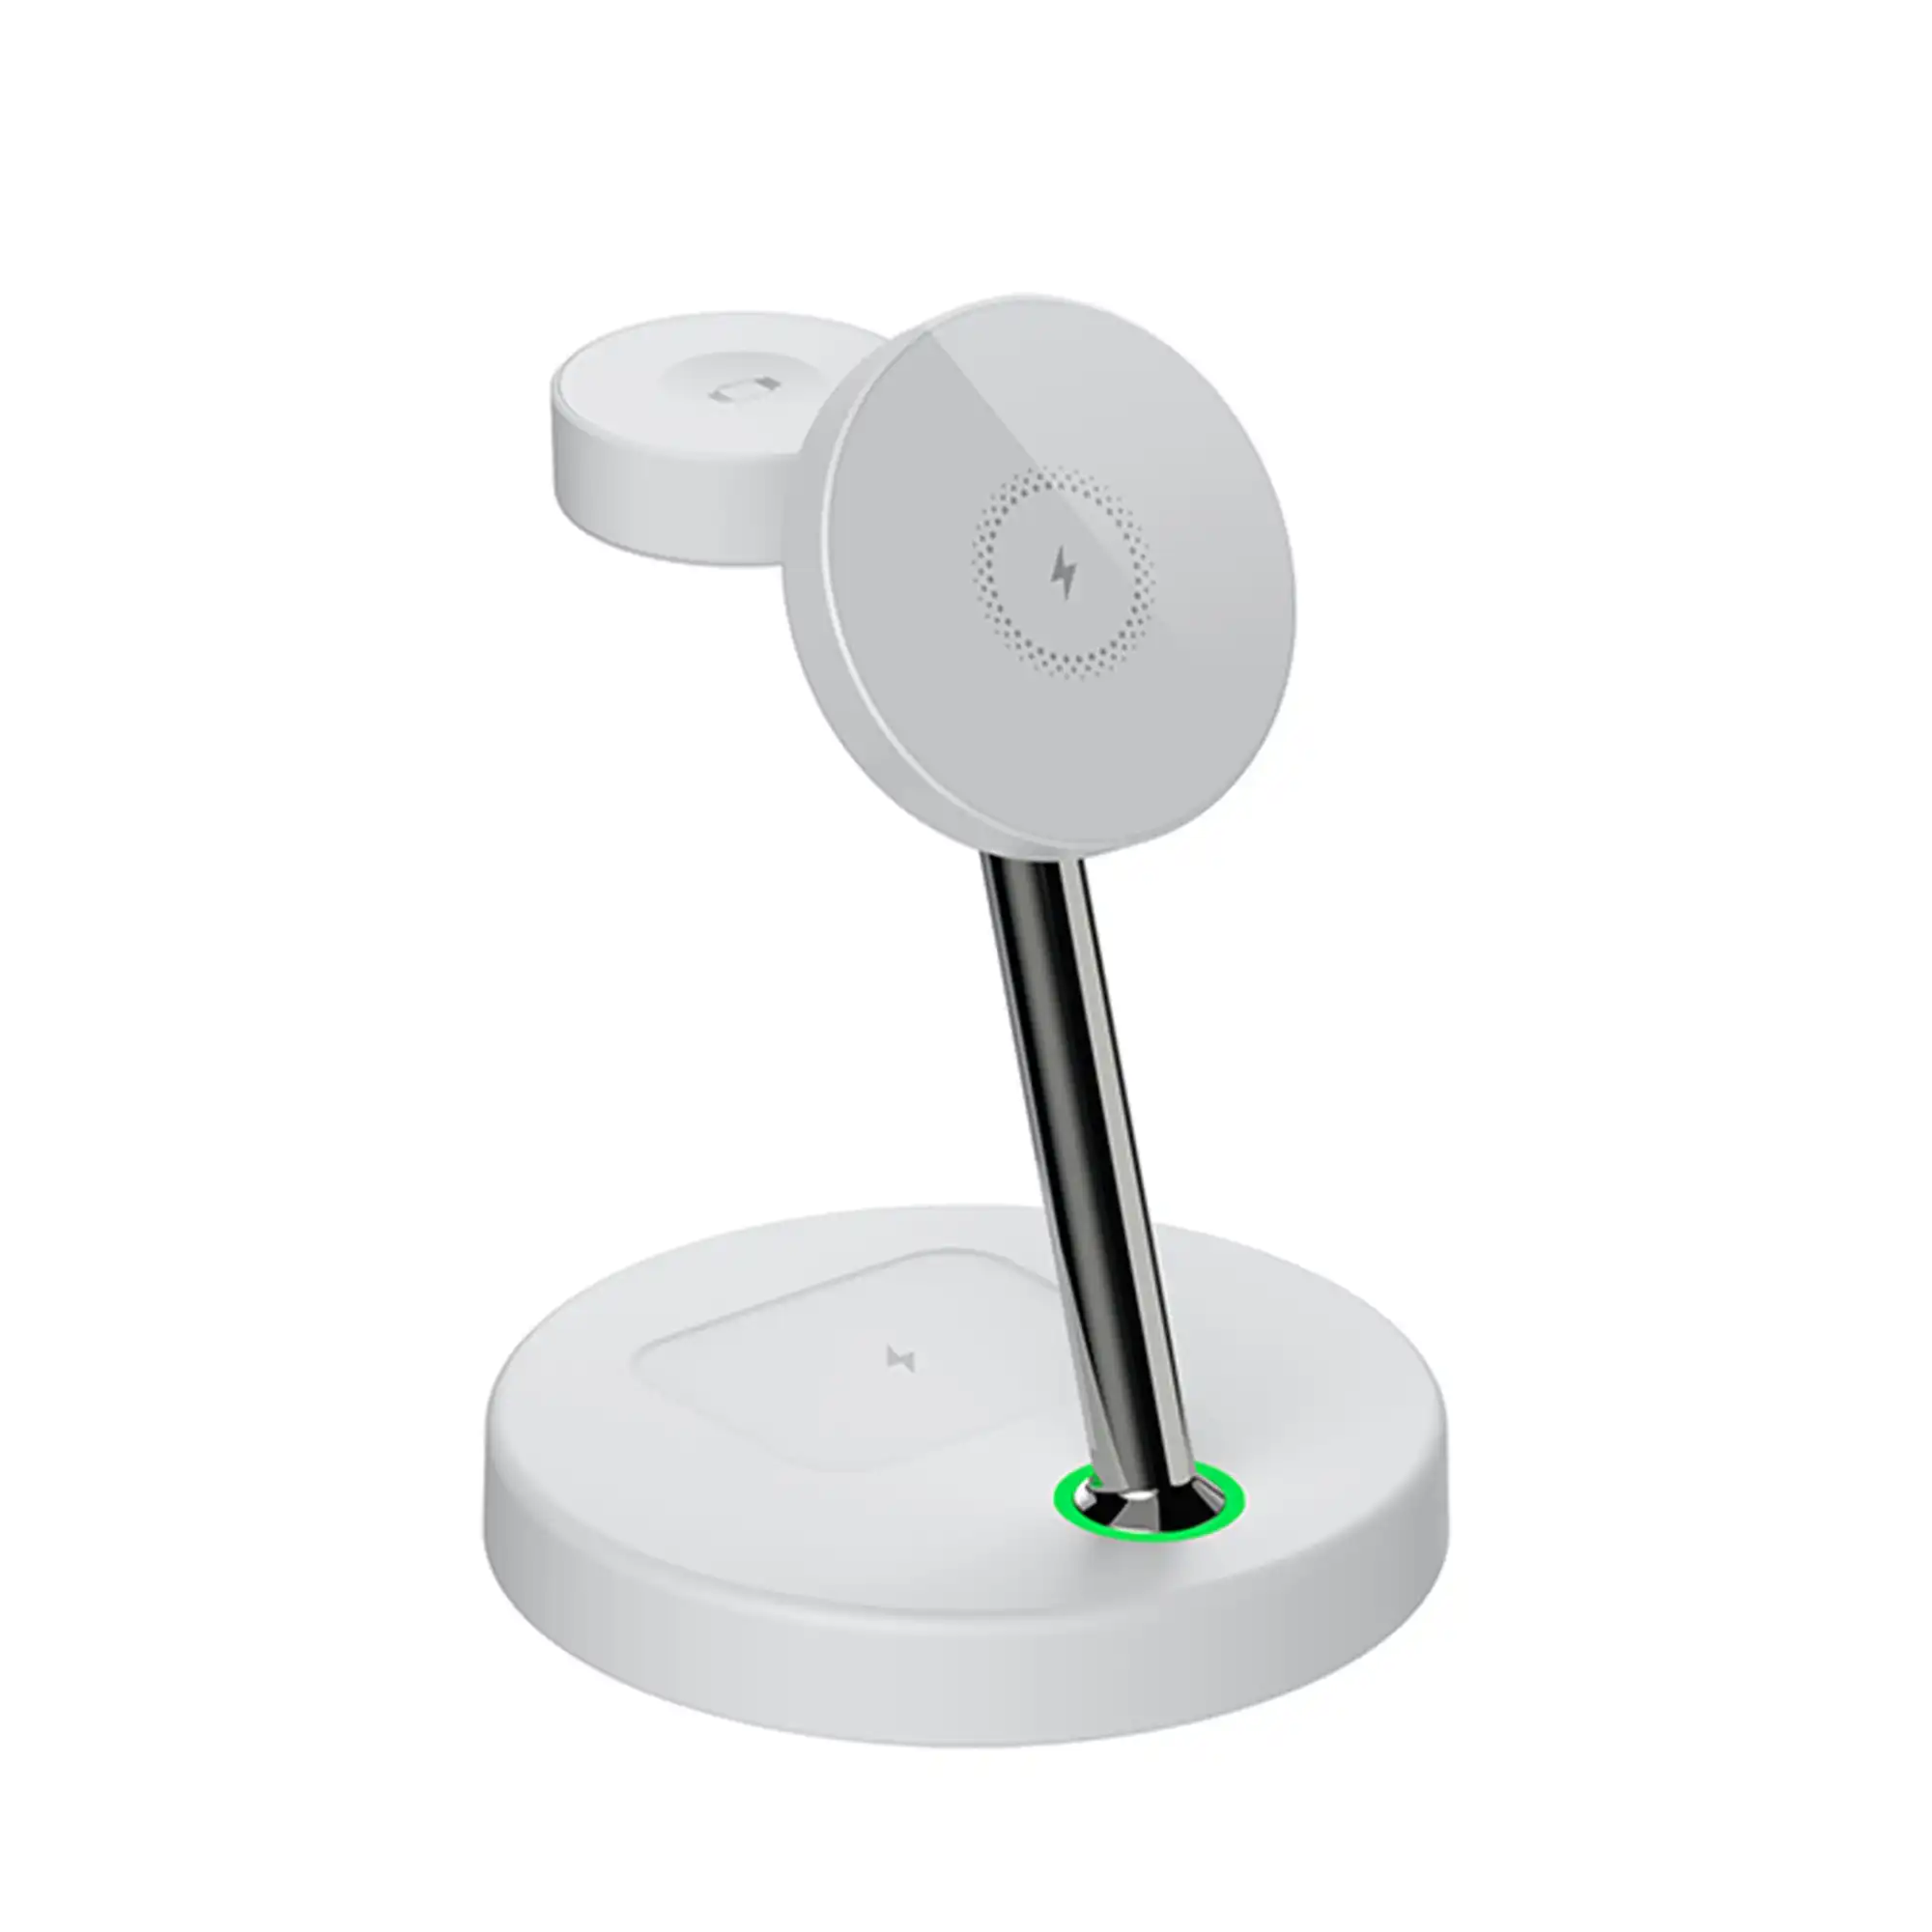 Laser Chargecore 3 in 1 Wireless Charging Station for Apple - White